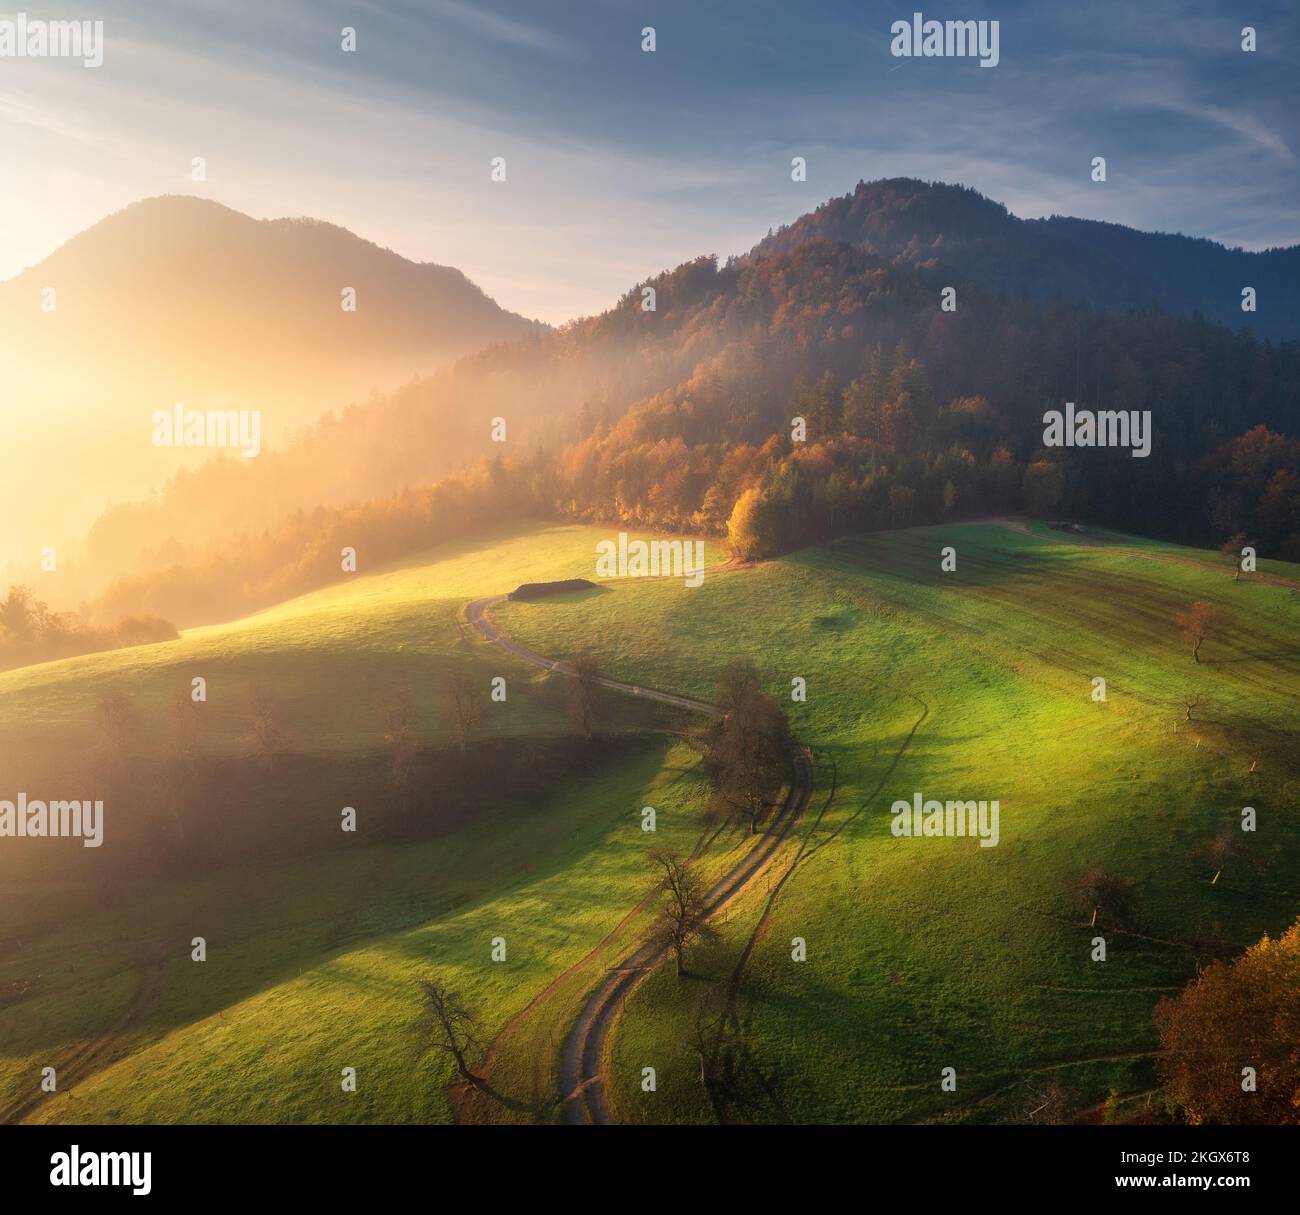 Aerial view of beautiful green hills and mountains in fog Stock Photo